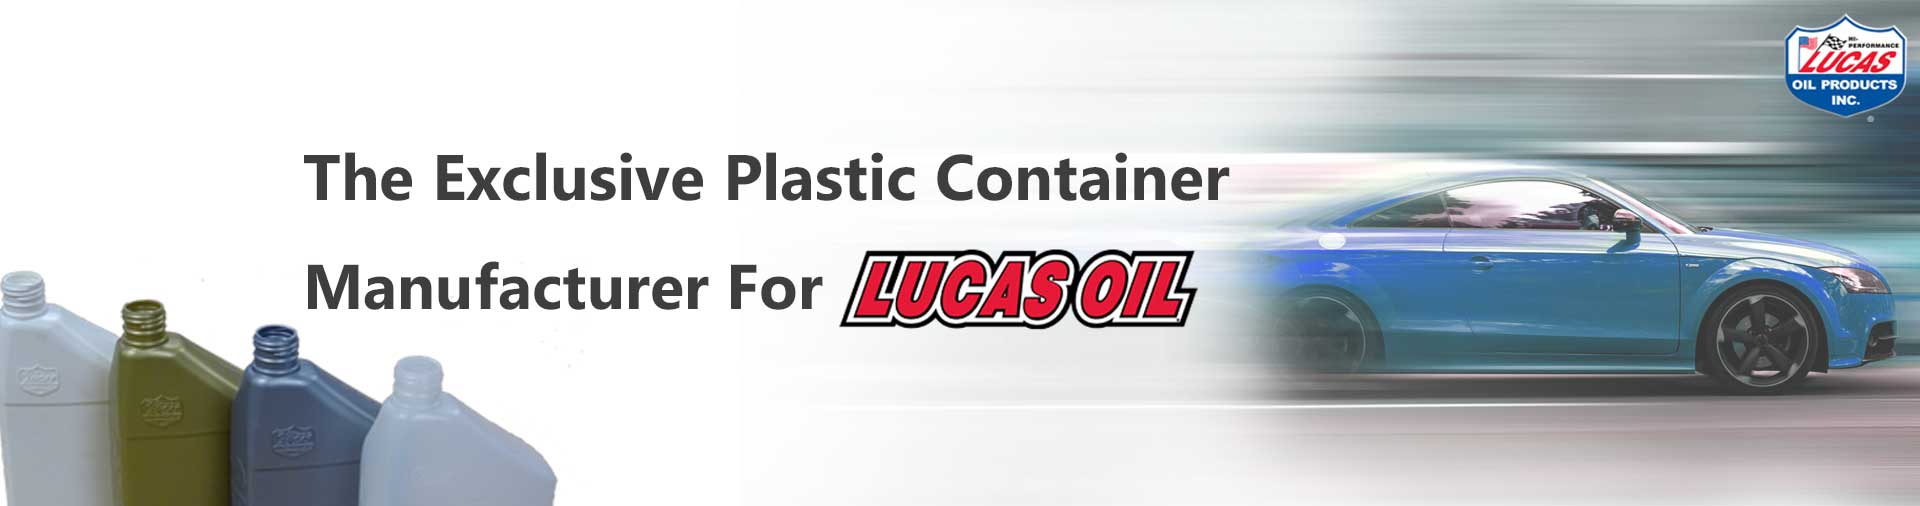 The Exclusive Plastic Container  Manufacturer For Lucas Oil